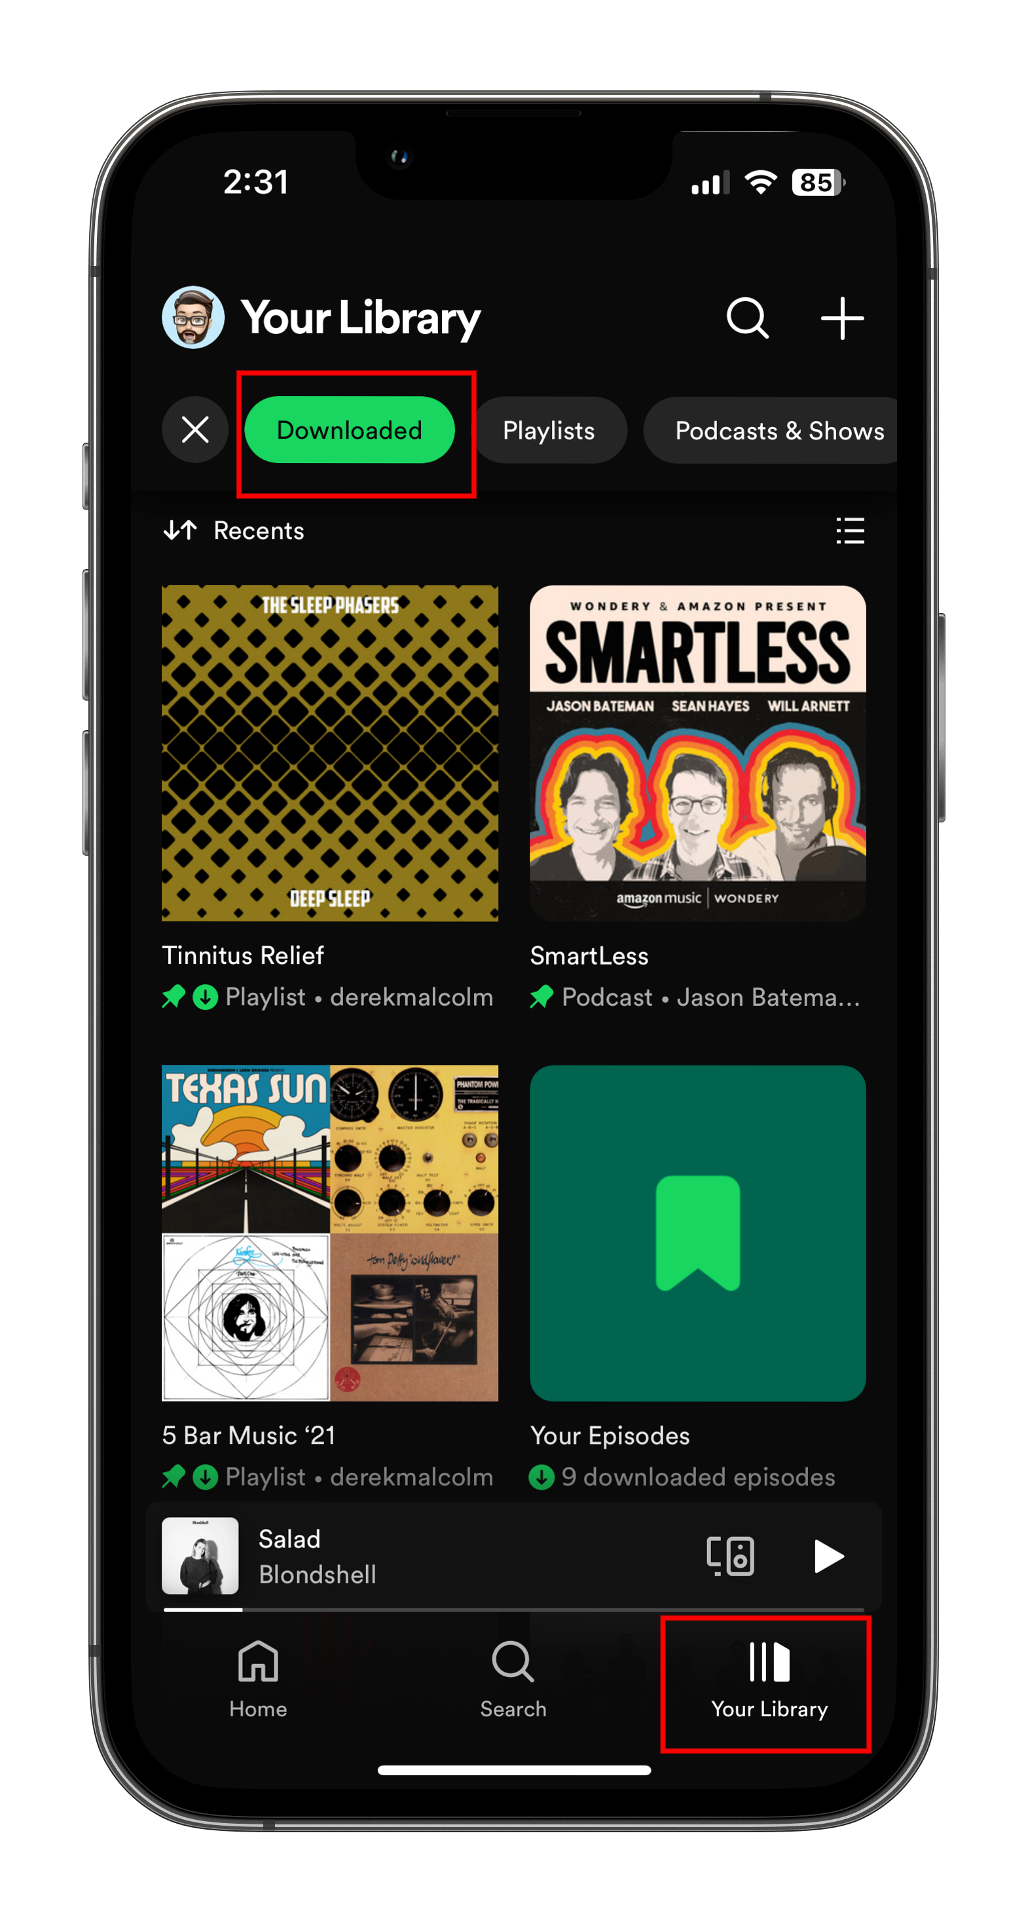 How to Download Music From Spotify